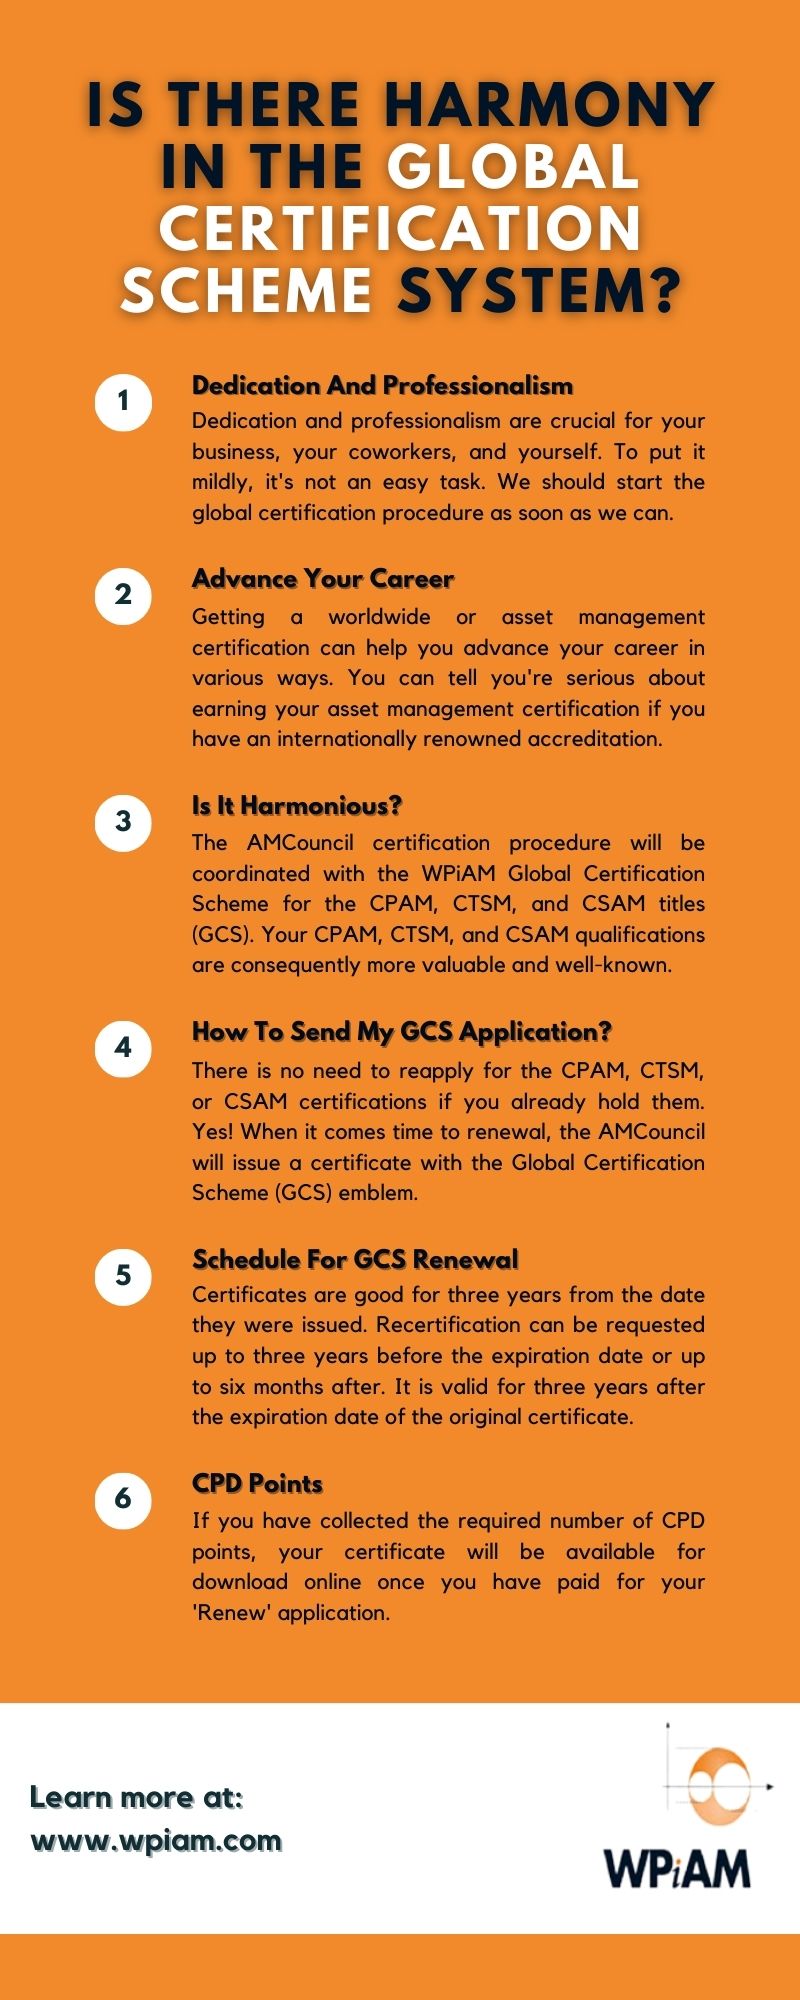 Is There Harmony In The Global Certification Scheme System?